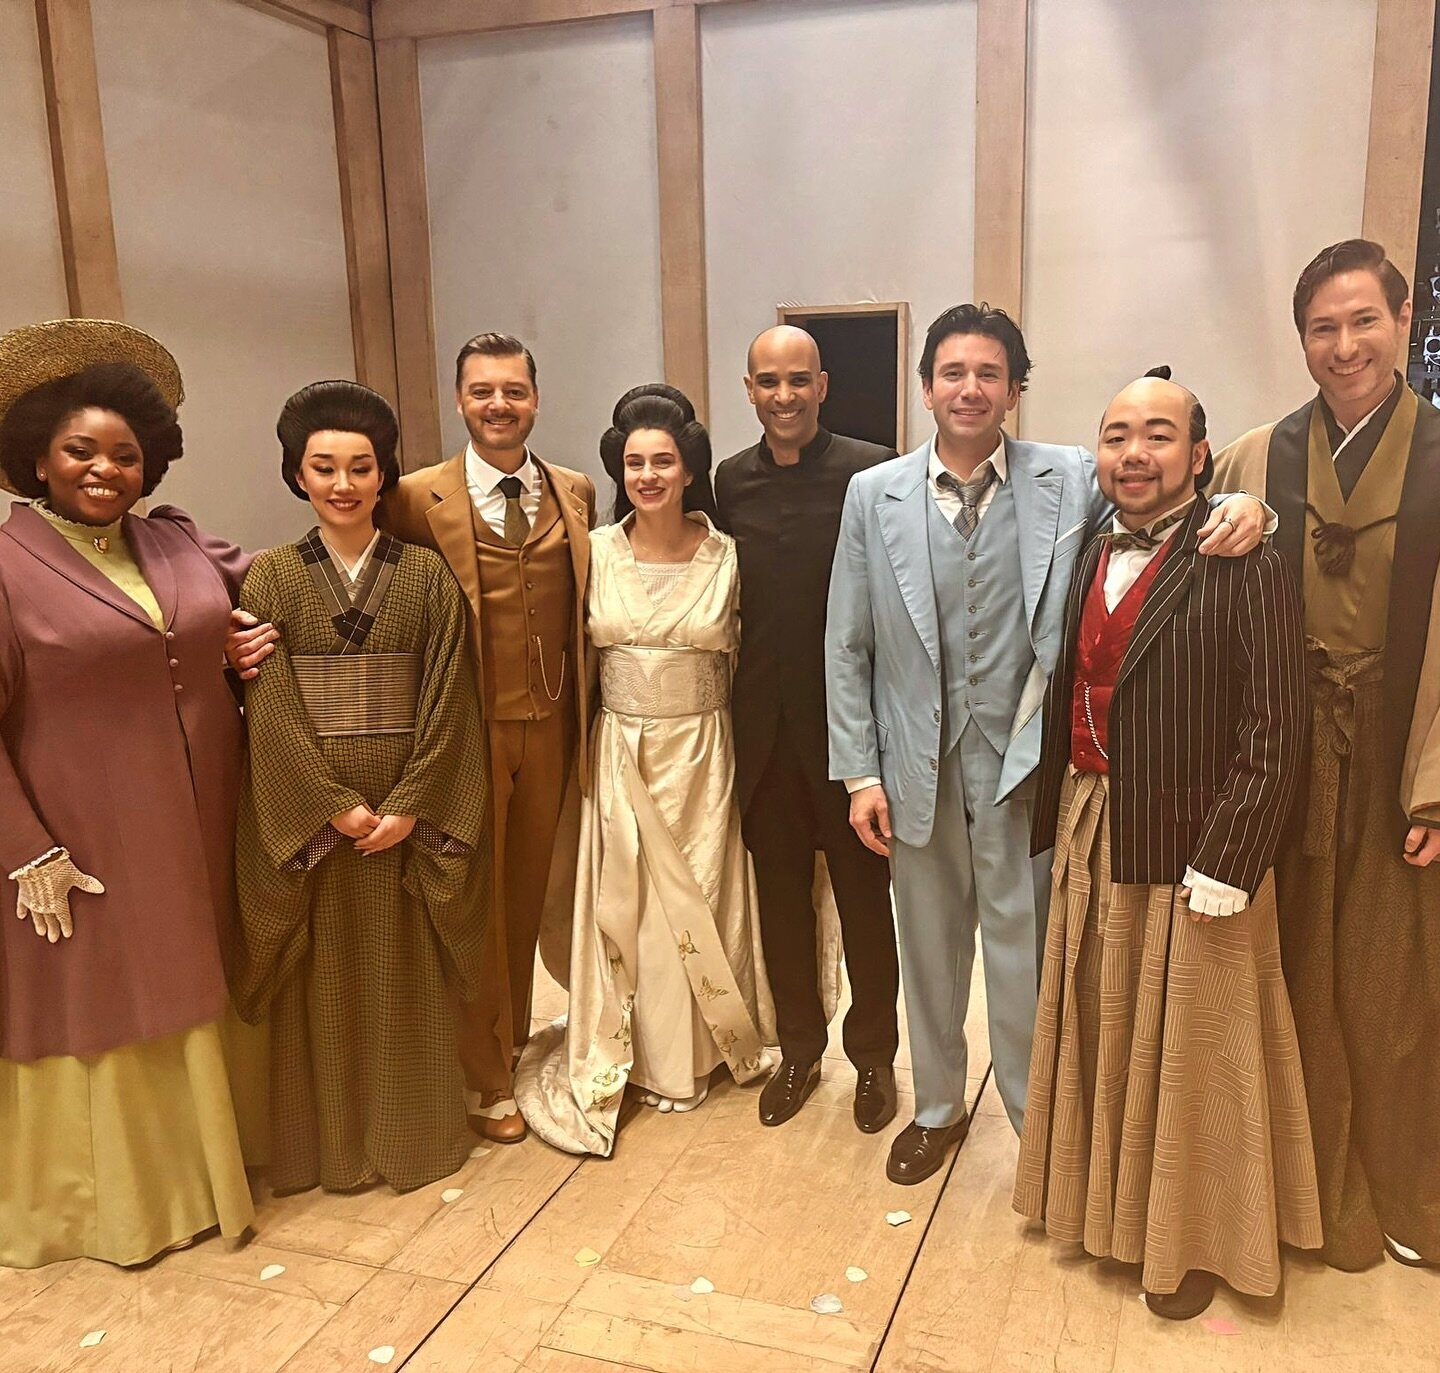 G&Igrave;A IL SOLE

Saying goodbye to our lovely first cast of Madama Butterfly at @royaloperahouse 

Thank you all for your magnificent artistry. Hope to see you soon.

Asmik Grigorian
@iamjoshuaguerrero 
@hongni.wu 
@l_vasar1987 
@huangyachung 
@ro